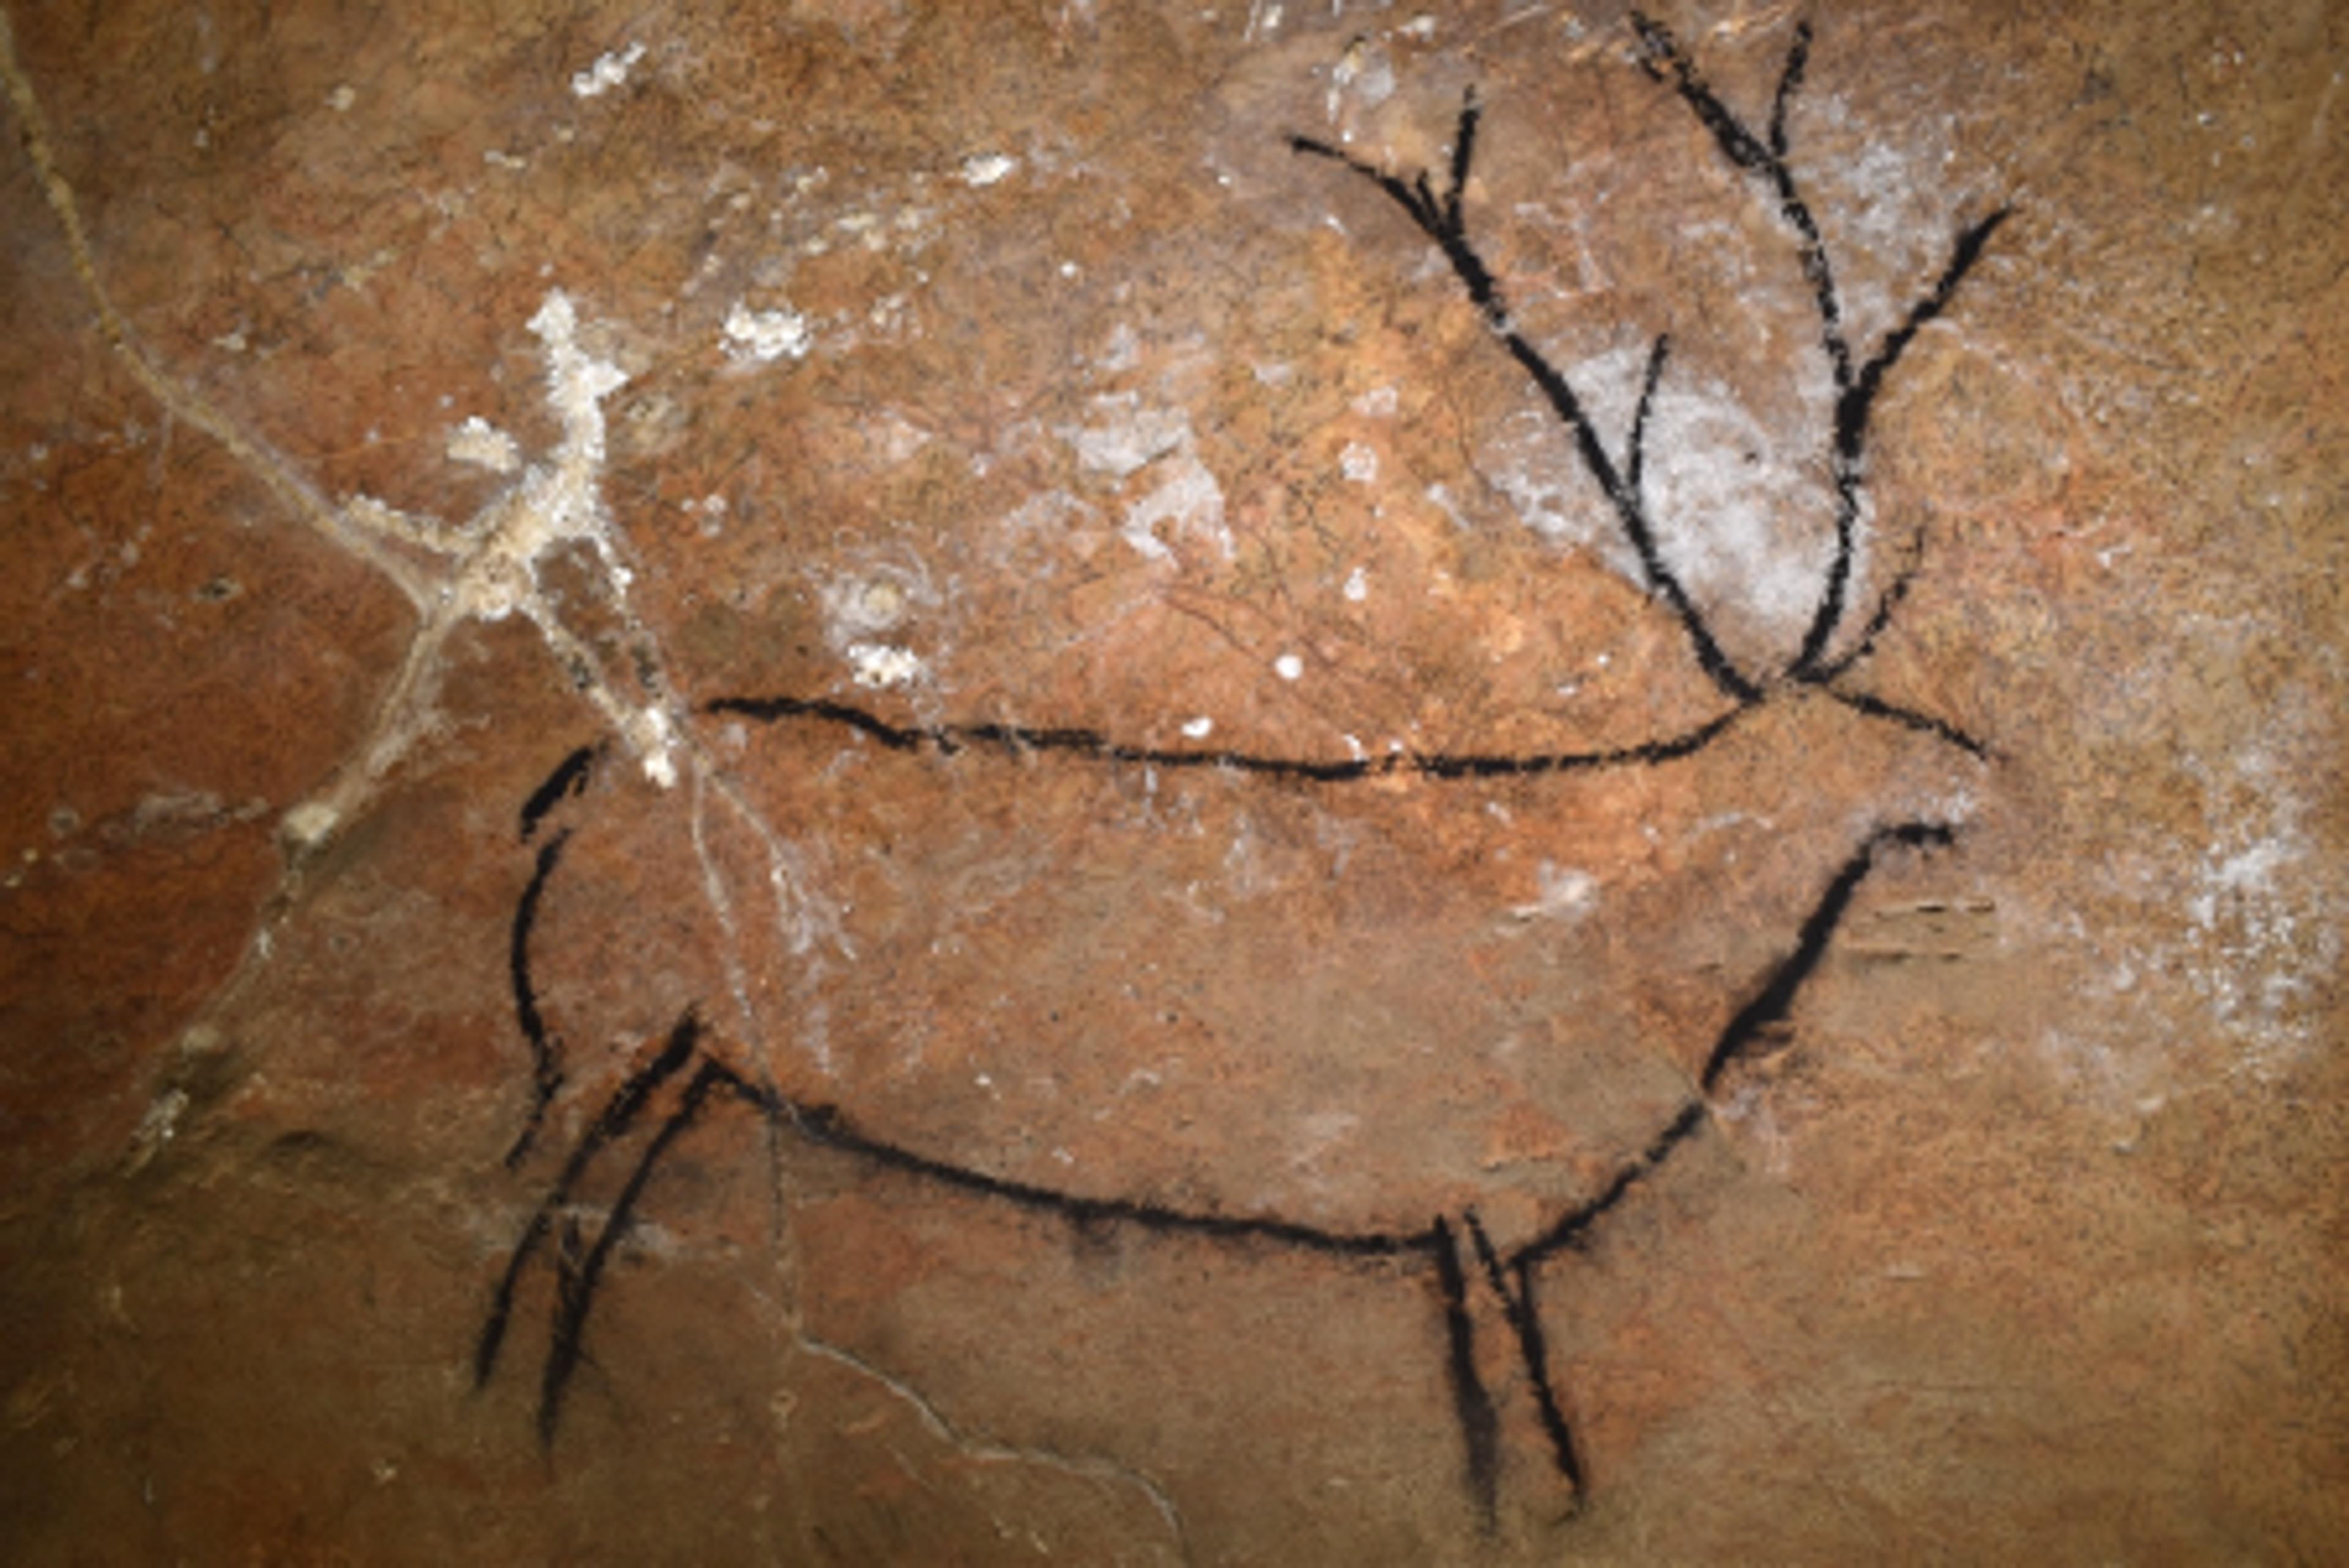 Cave painting of a deer with antlers, depicted with simple black lines on a brown, textured rock surface.